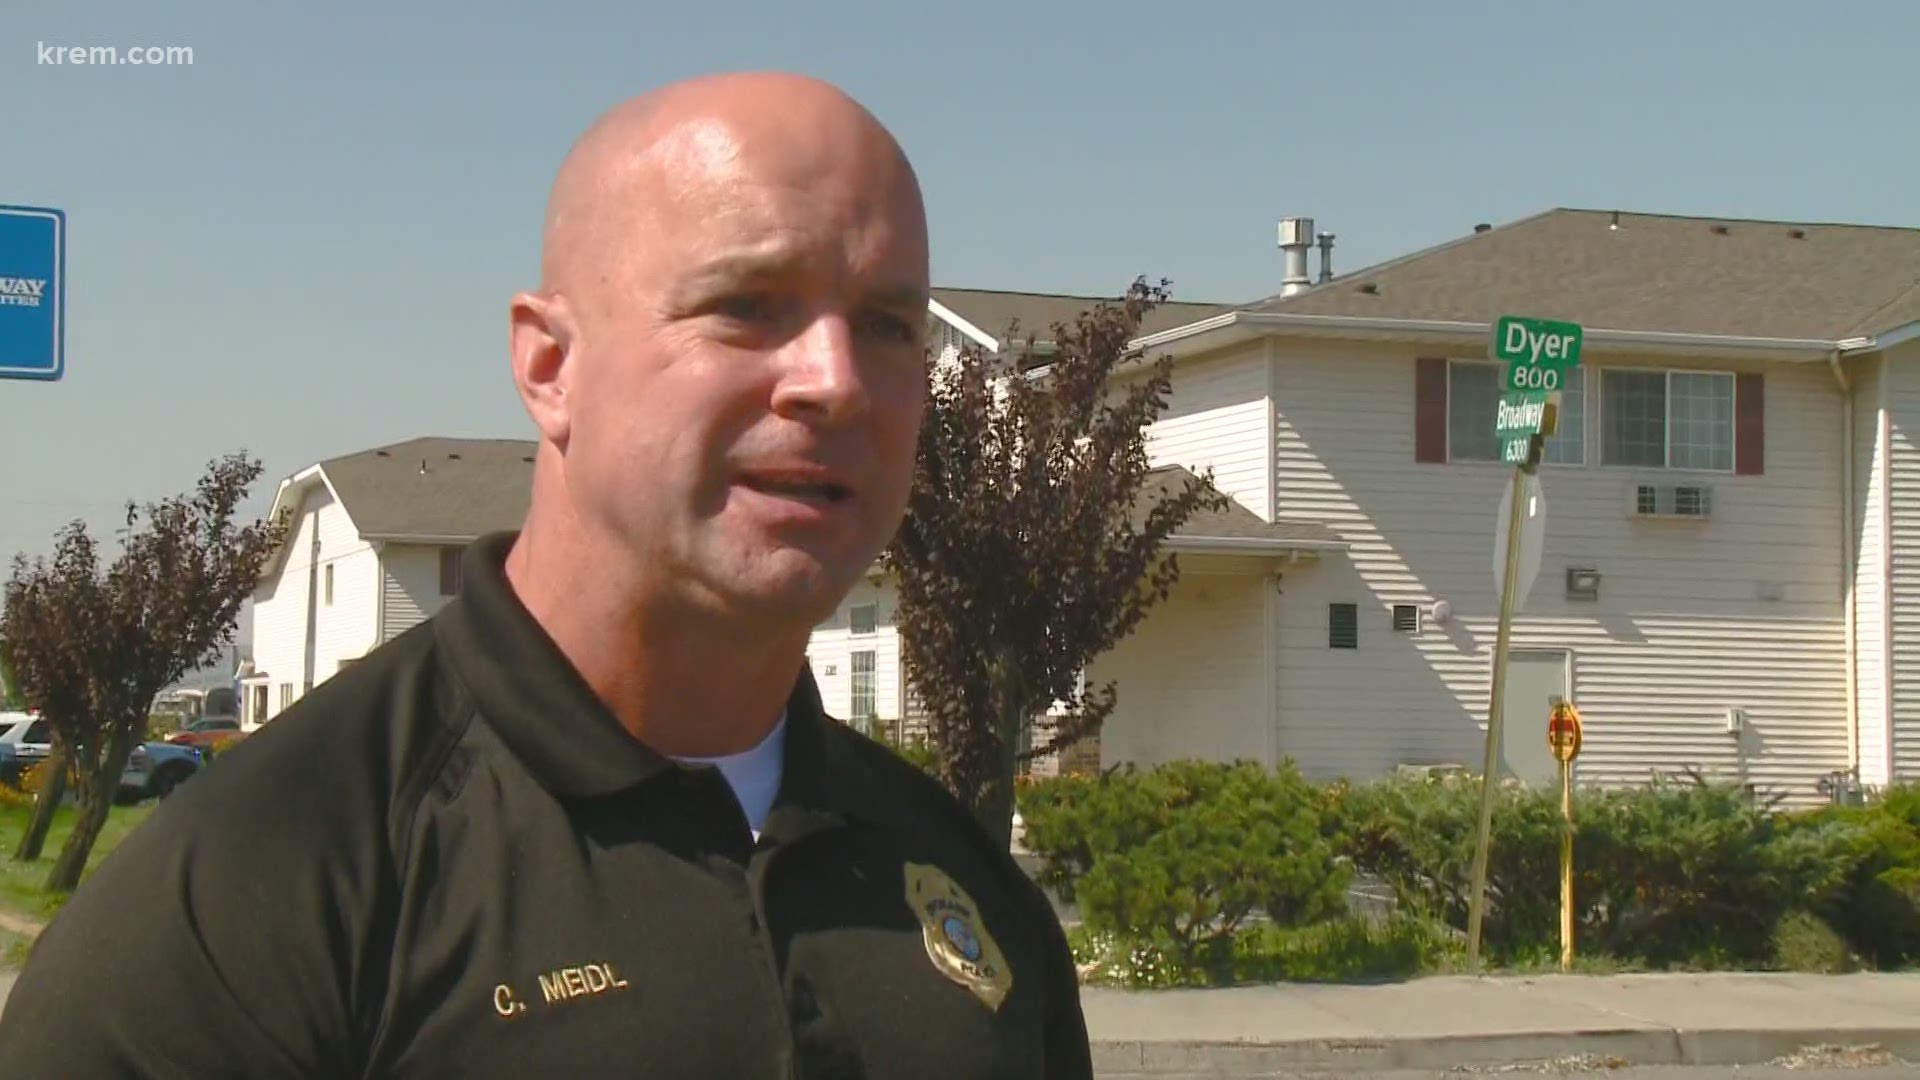 Spokane Police Chief Craig Meidl said the person who was killed was a carjacking suspect and had eluded police on Thursday.